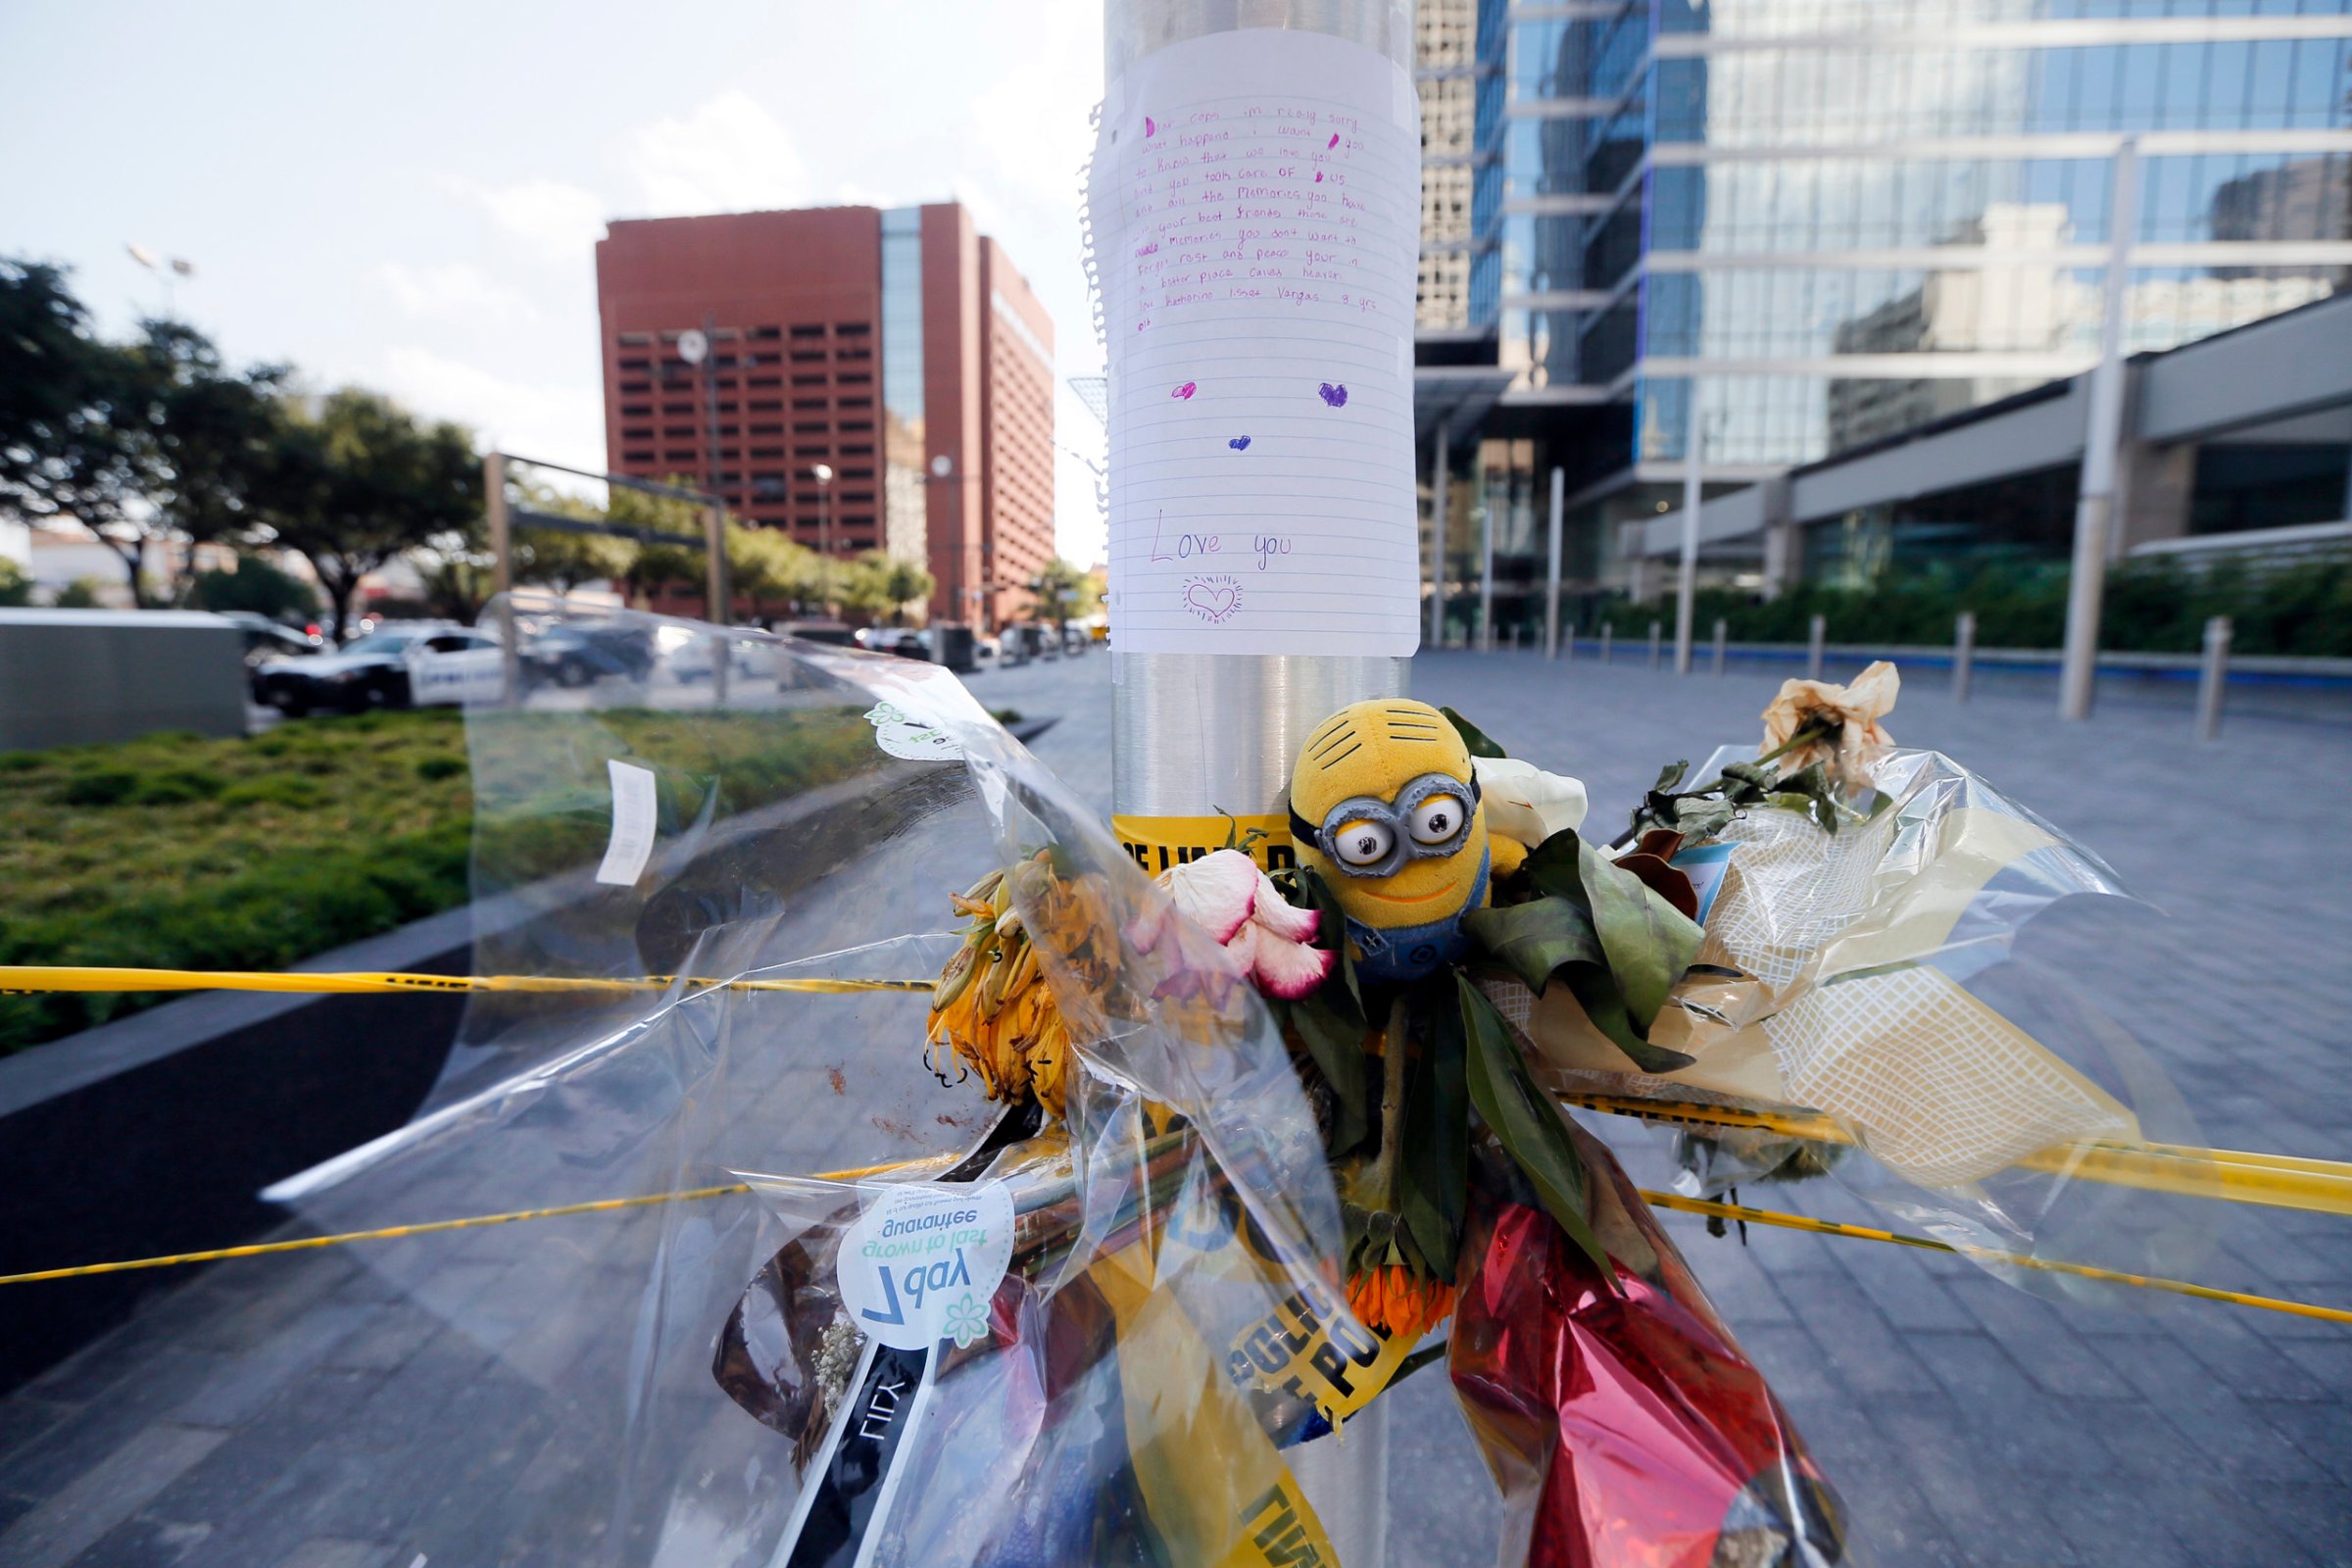 A letter from a child to Dallas police officers sits atop flowers and other items left at a makeshift memorial by the crime scene of Thursday night's shooting in Dallas on July 10, 2016.